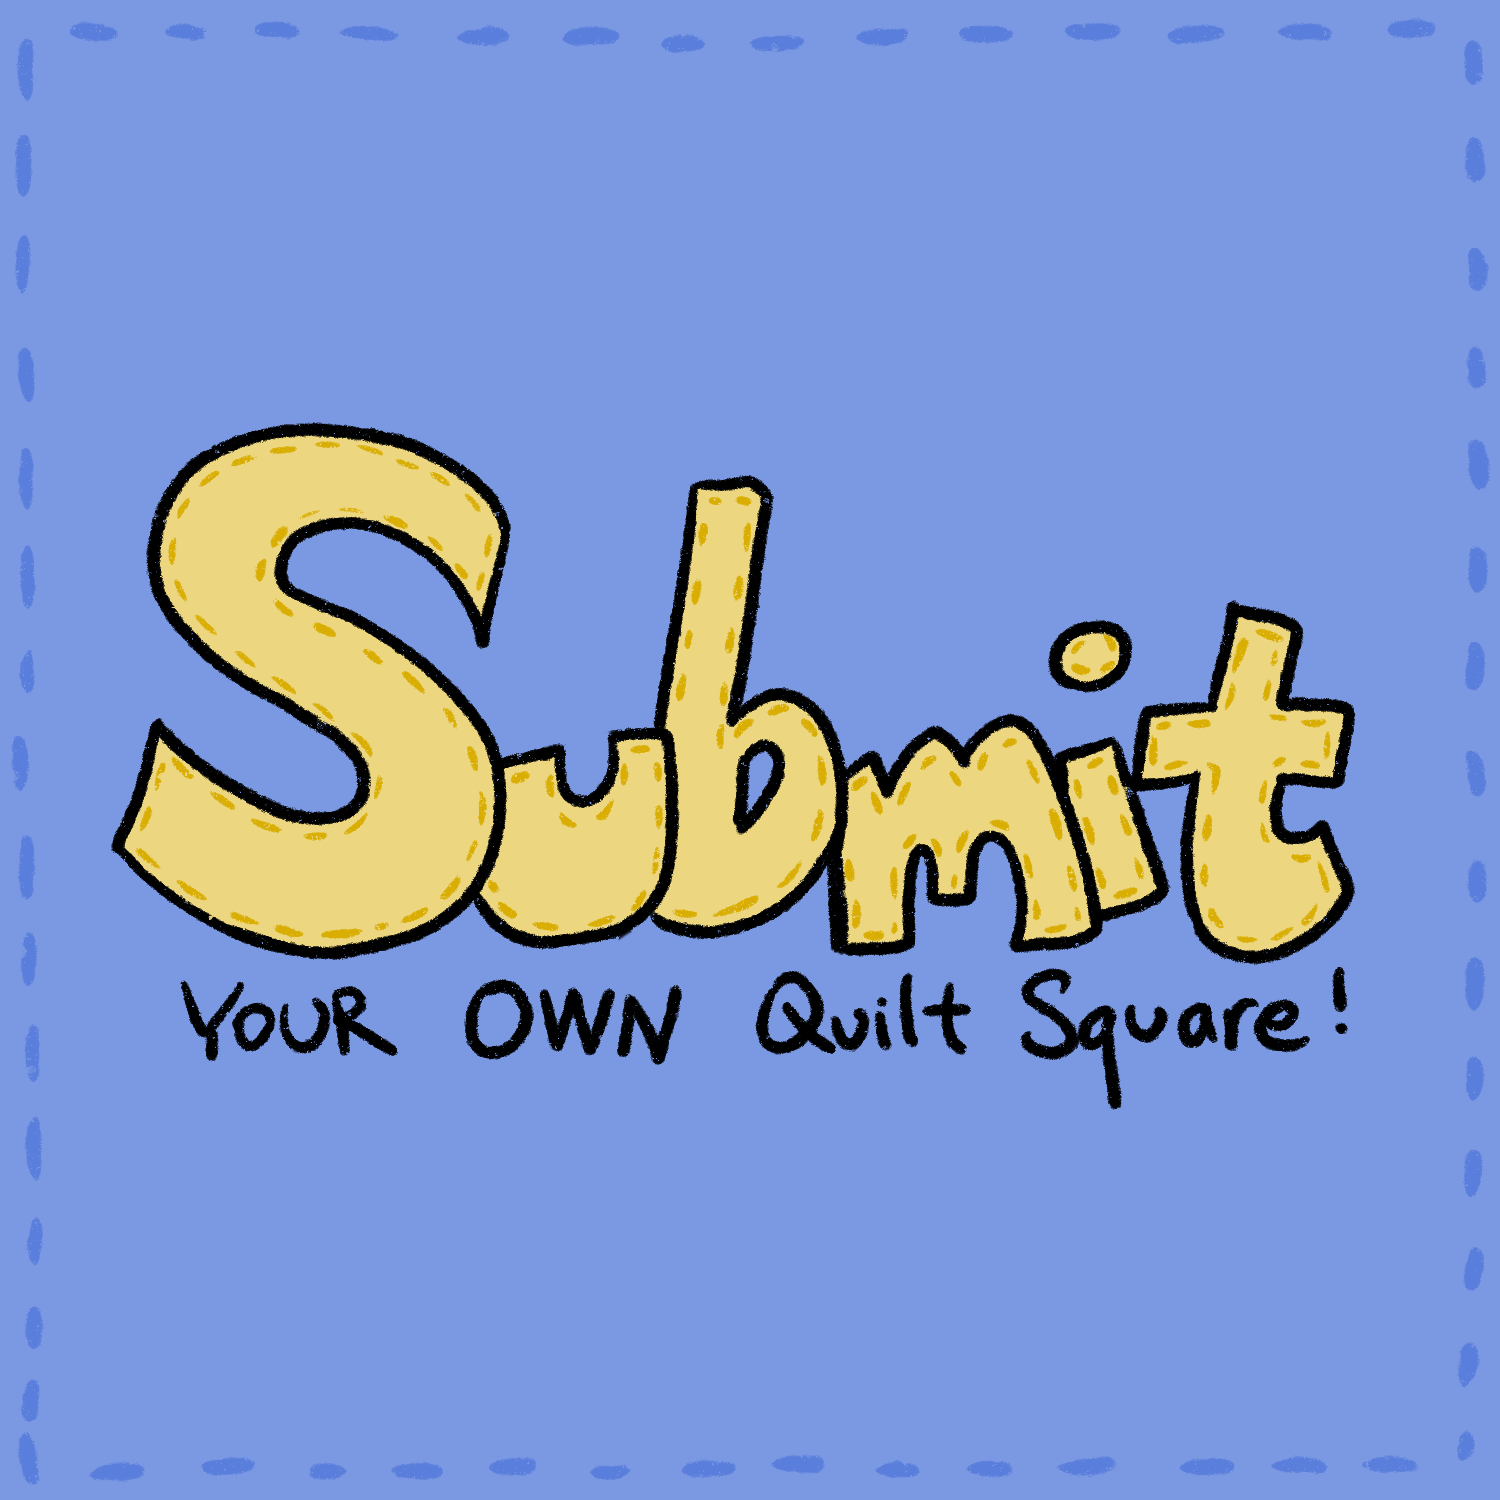 Submit your own quilt square